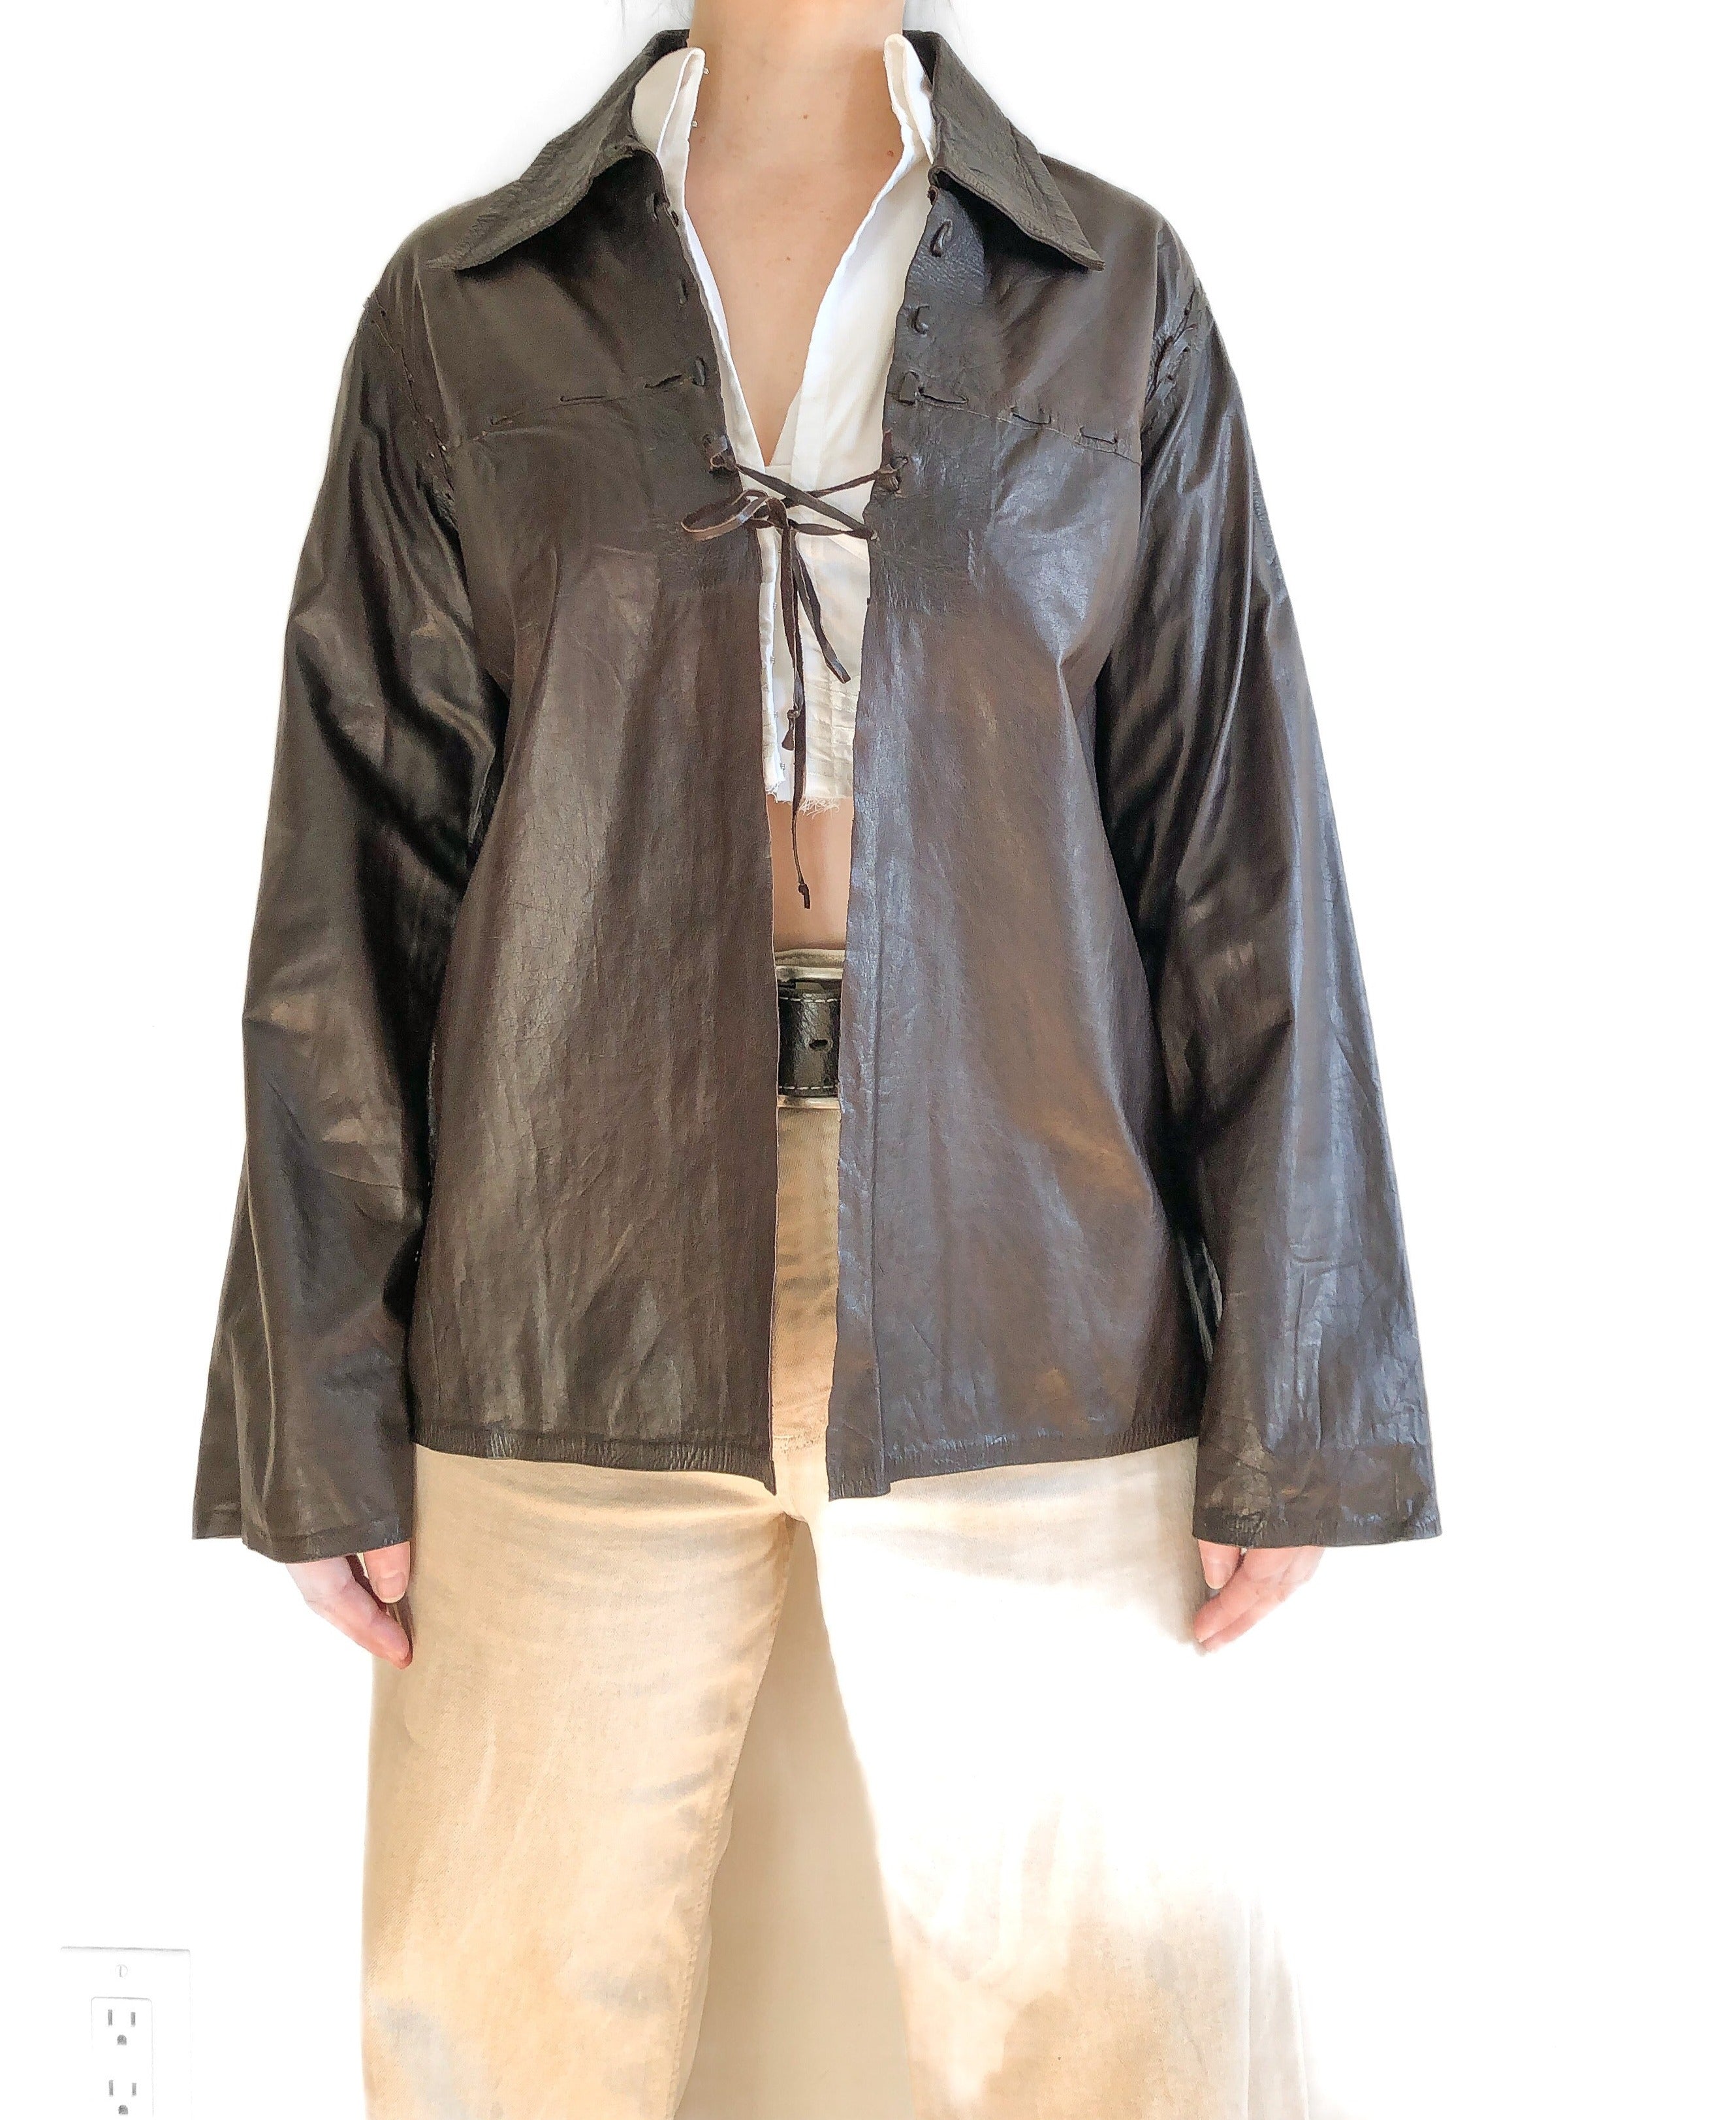 Brown Leather Overshirt with Leather Stitching